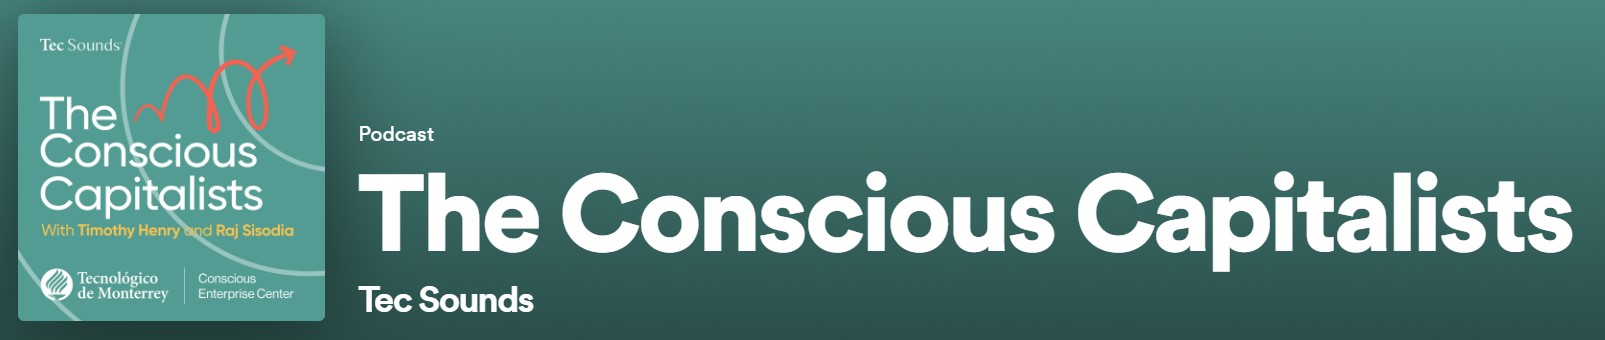 The Conscious Capitalists podcast